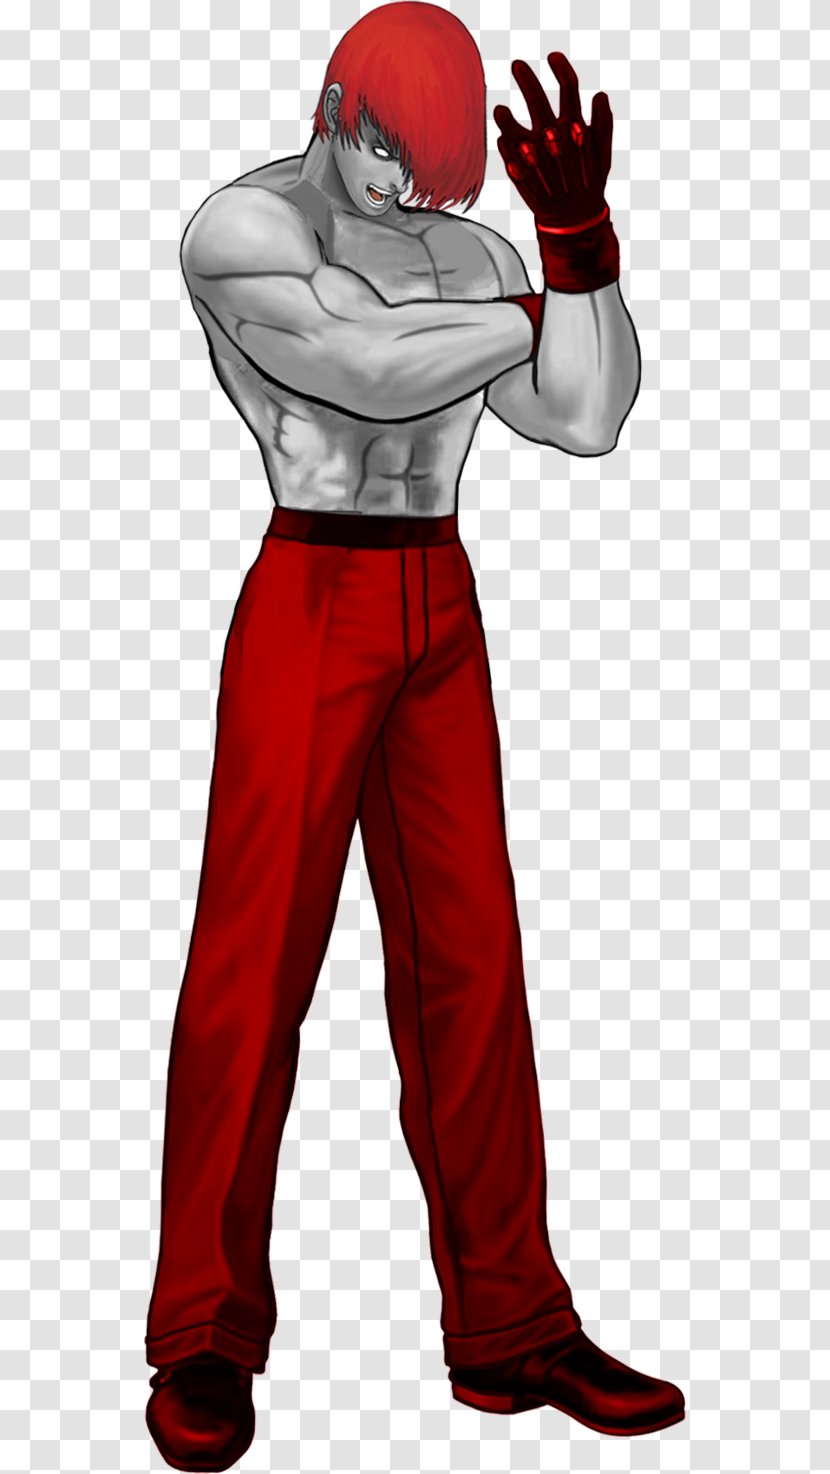 The King Of Fighters '98 XIII 2001 Rugal Bernstein Kyo Kusanagi Transparent PNG